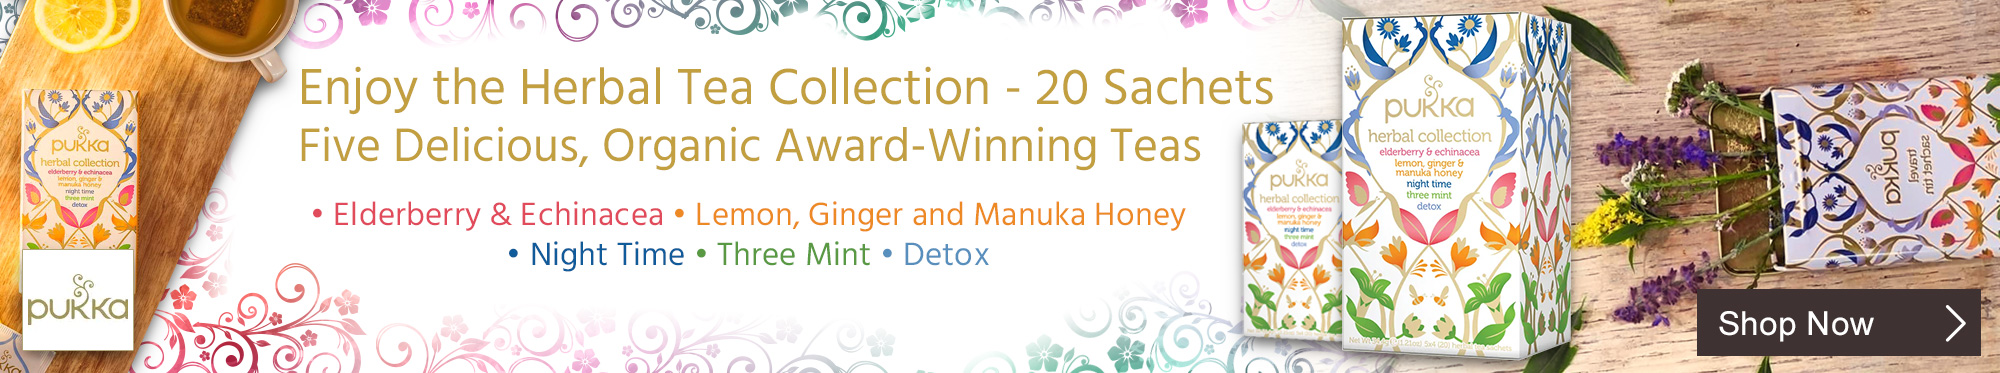 Enjoy Pukka's Herbal Tea Collection <TAG>ONLY</TAG>